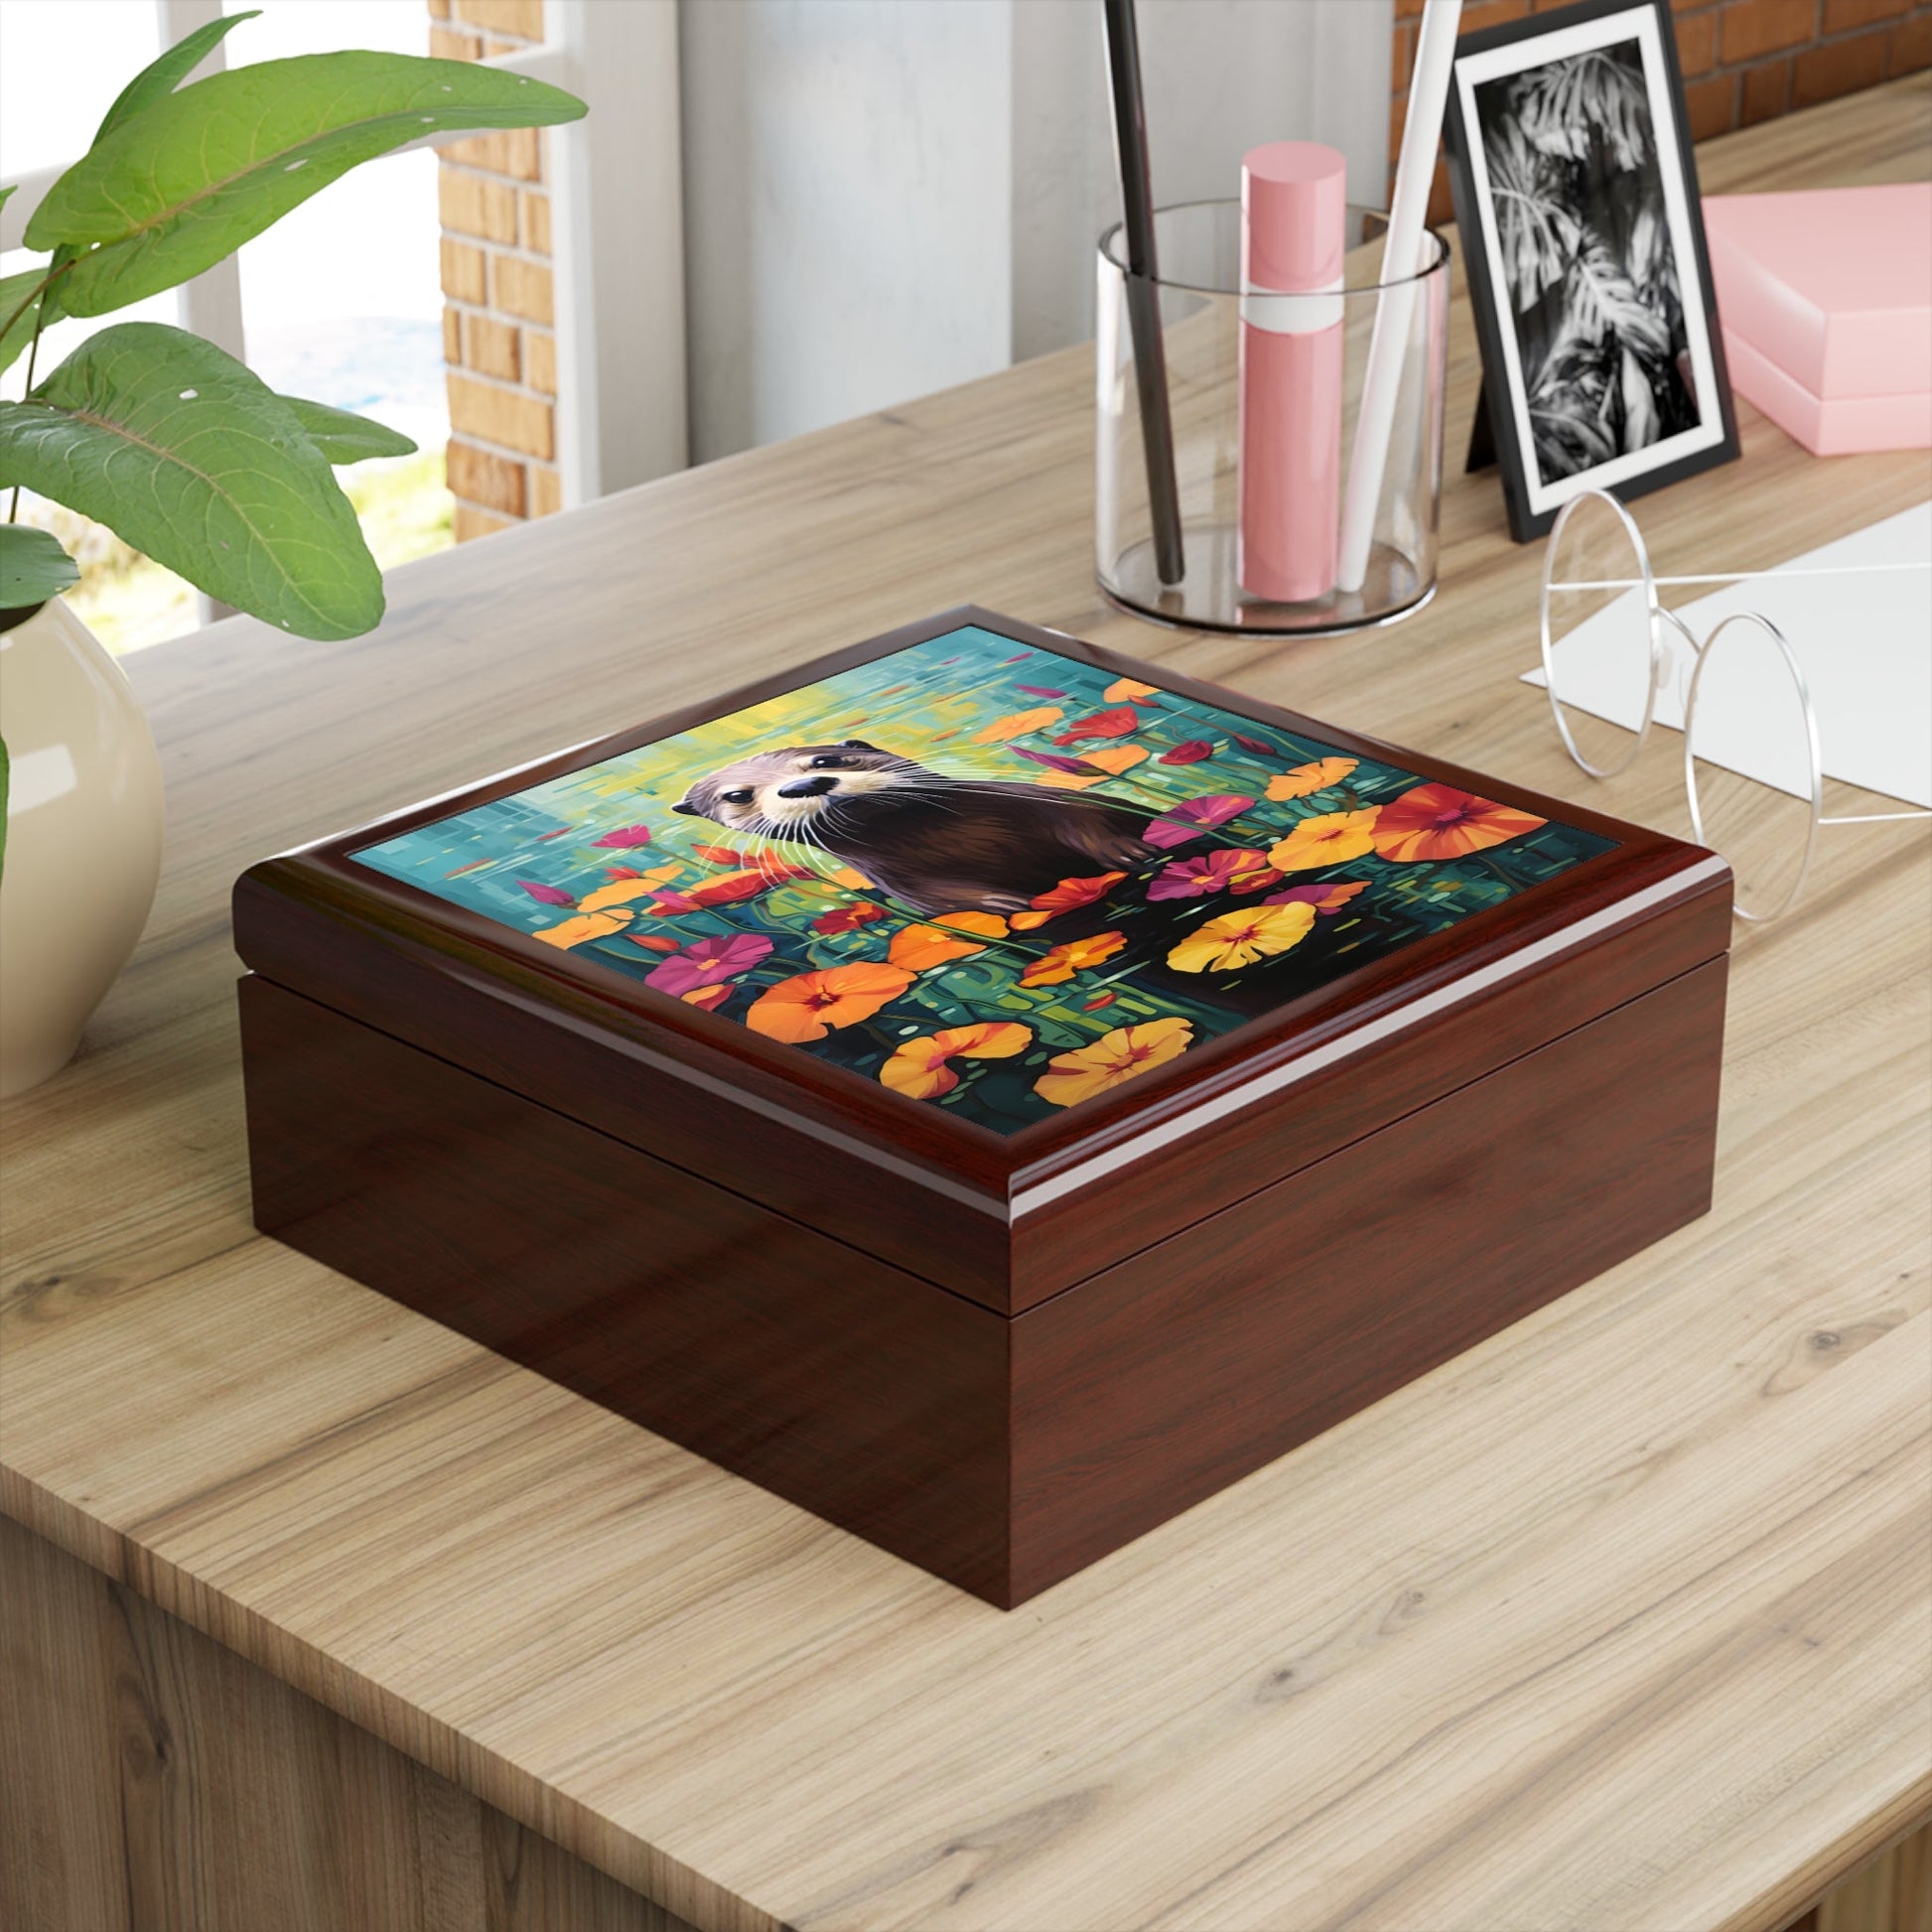 Otter Among the Lily Pads Artwork Gift and Jewelry Box